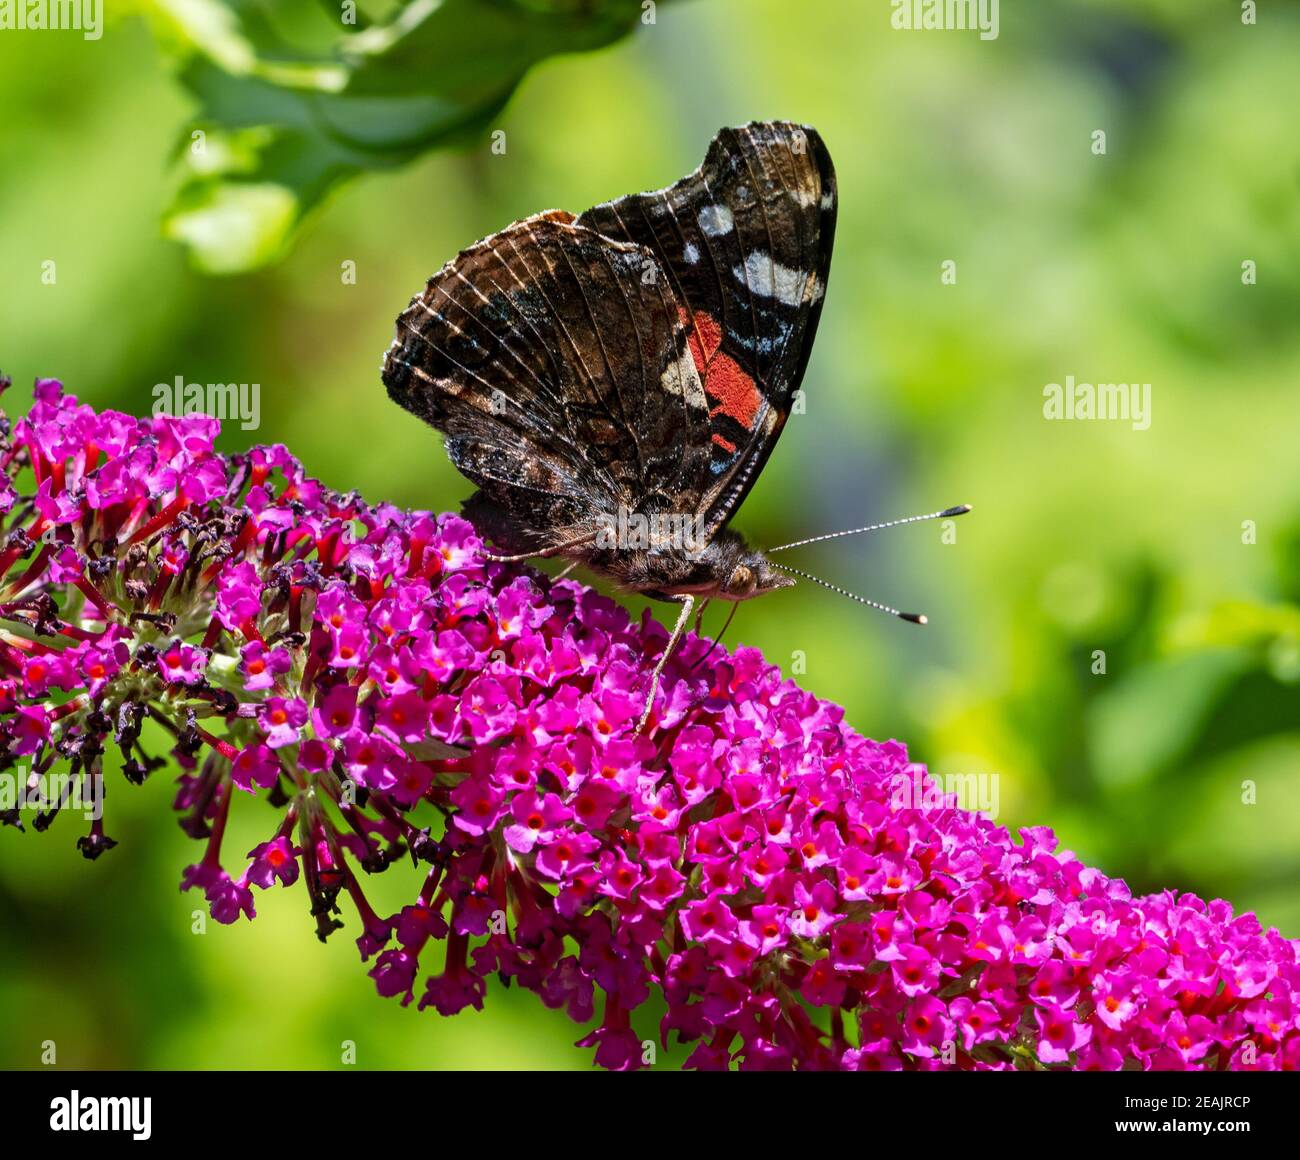 Admiral butterfly collecting nectar at a budleja blossom Stock Photo